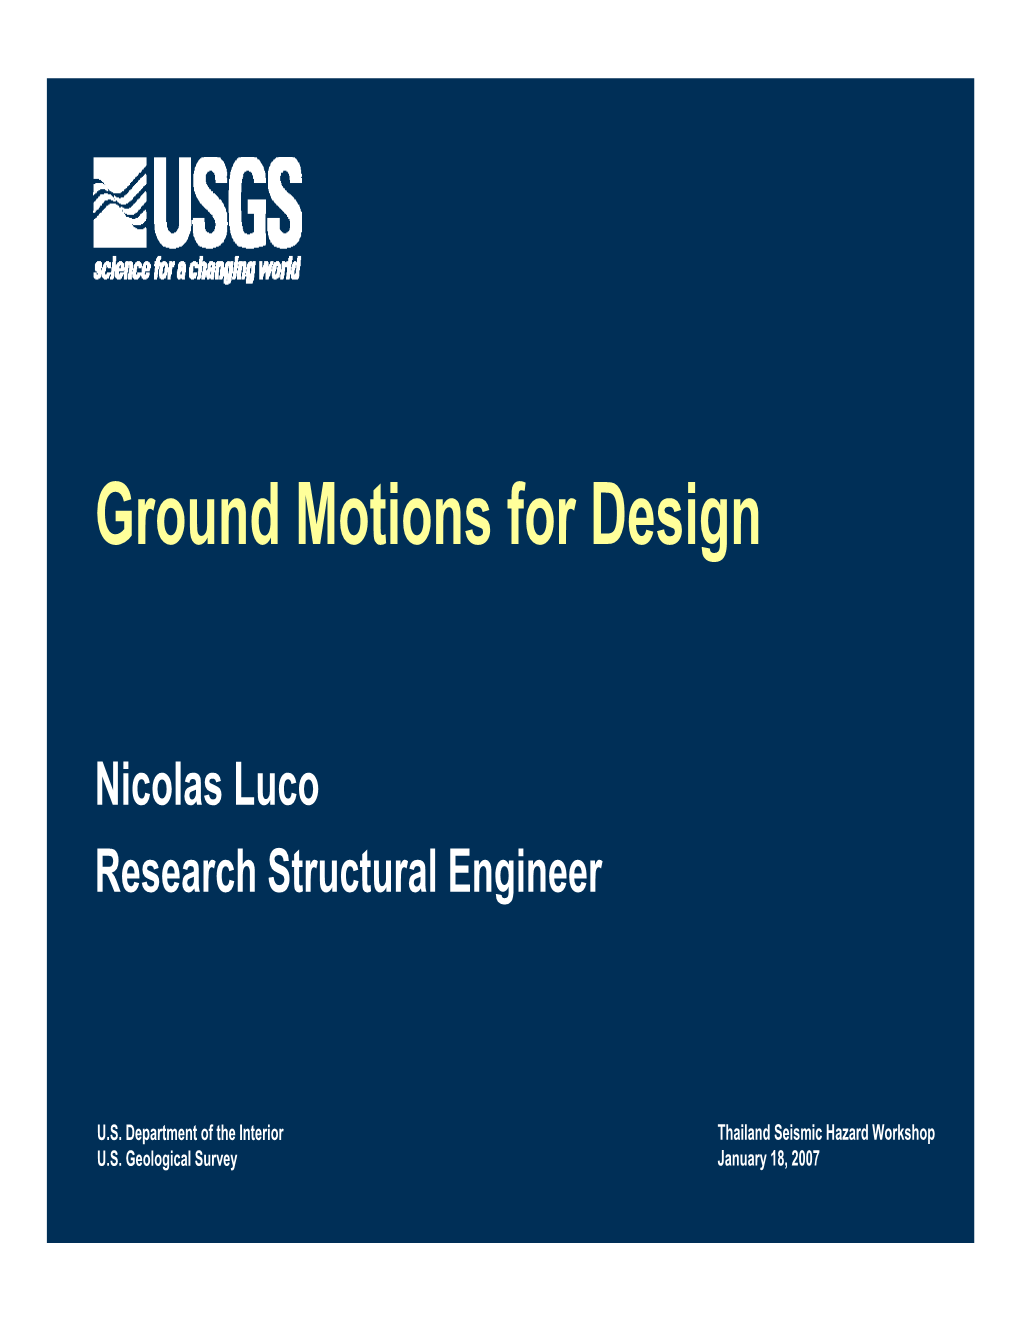 Ground Motions for Design